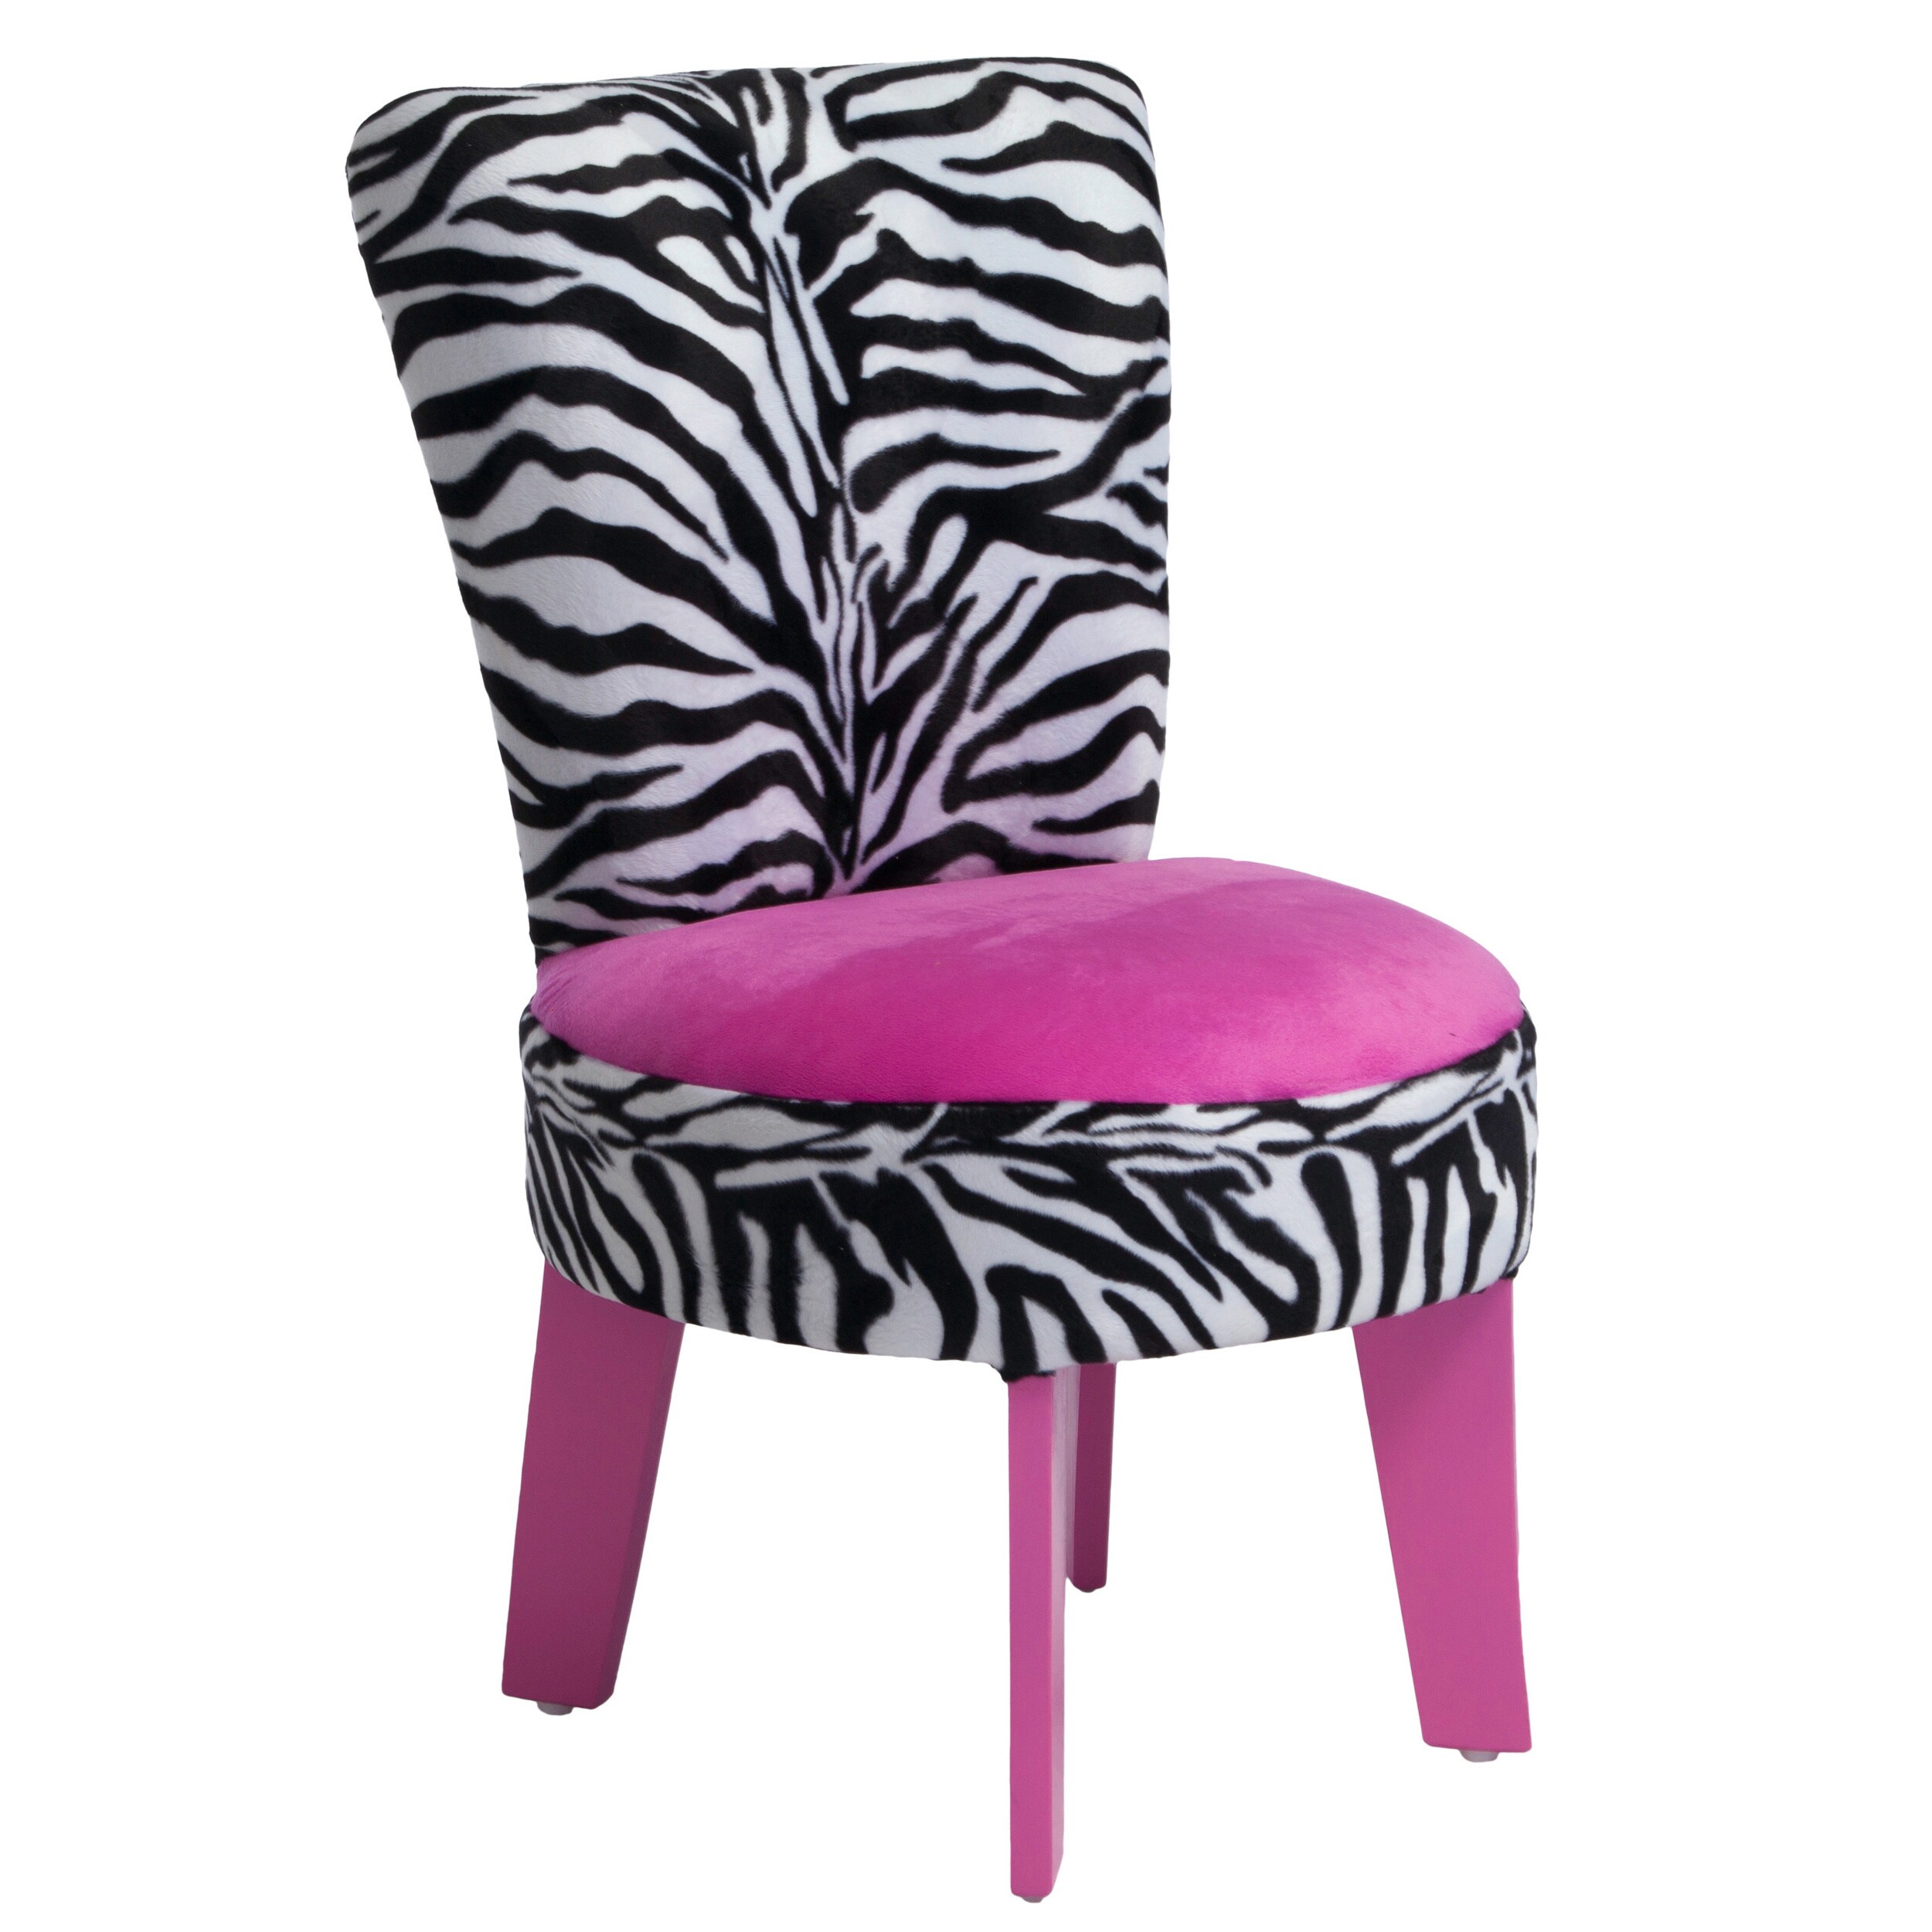  Zebra/ Pink Chair Was $121.99 Today $74.99 Save 39%